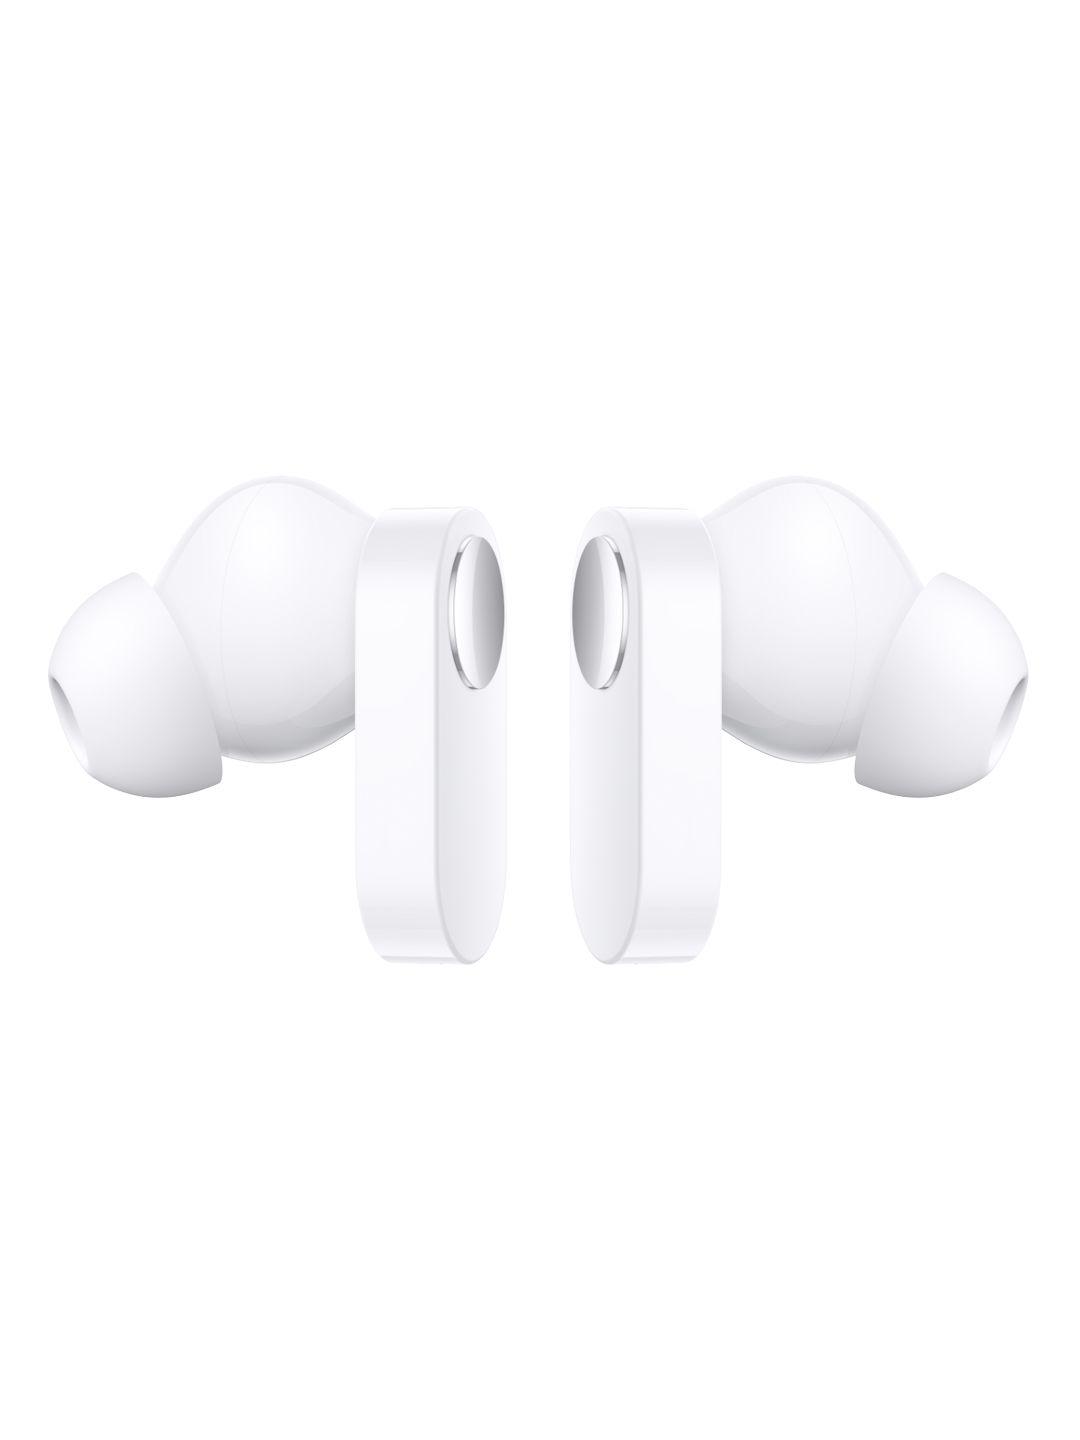 oneplus nord buds tws in ear earbuds with 12.4mm titanium drivers & fast charging